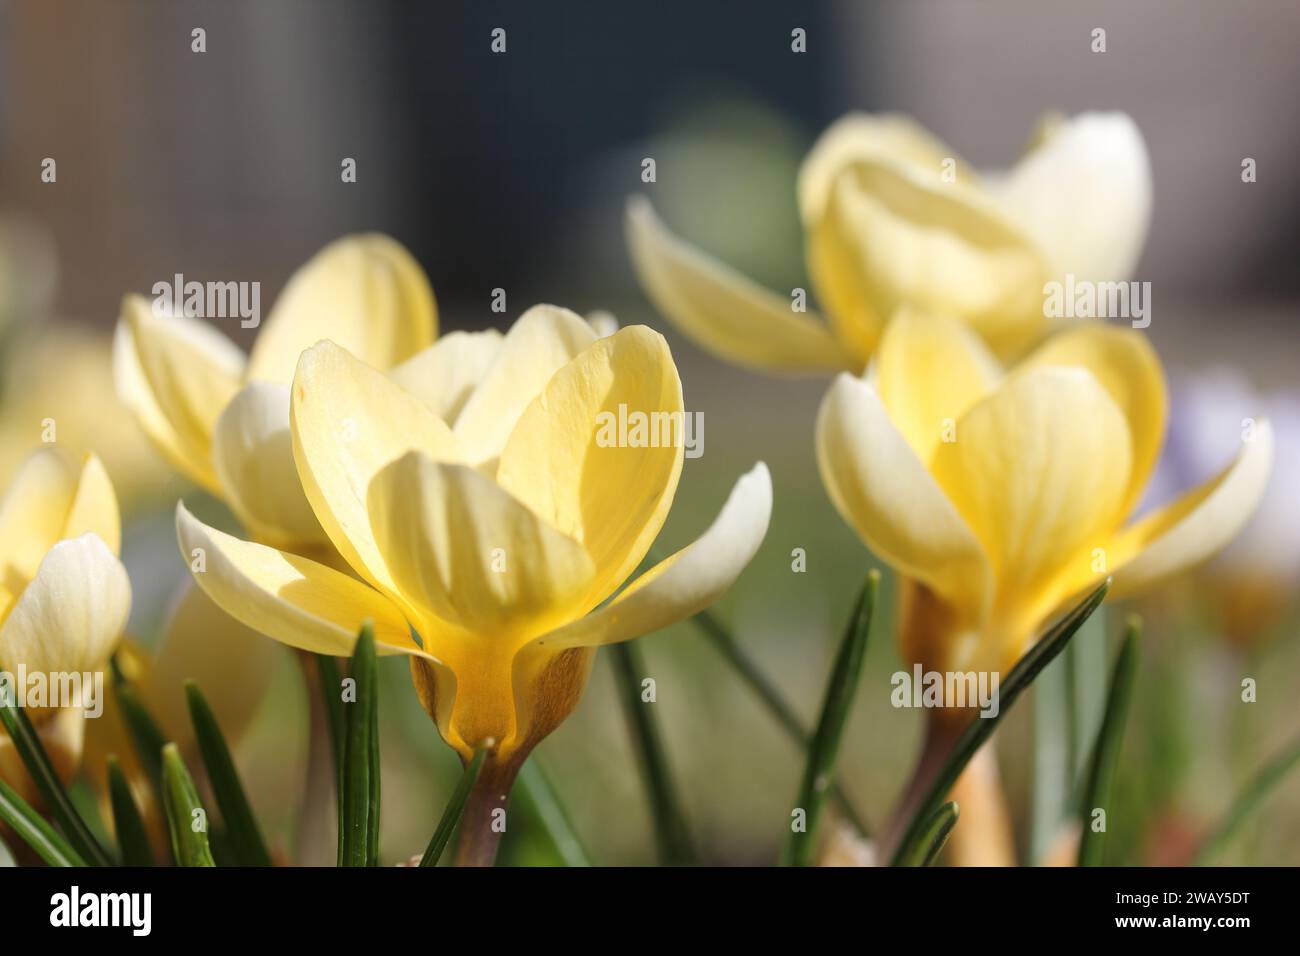 Crocus (English plural: crocuses or croci) is a genus of flowering plants in the iris family comprising 90 species of perennials growing from corms Stock Photo